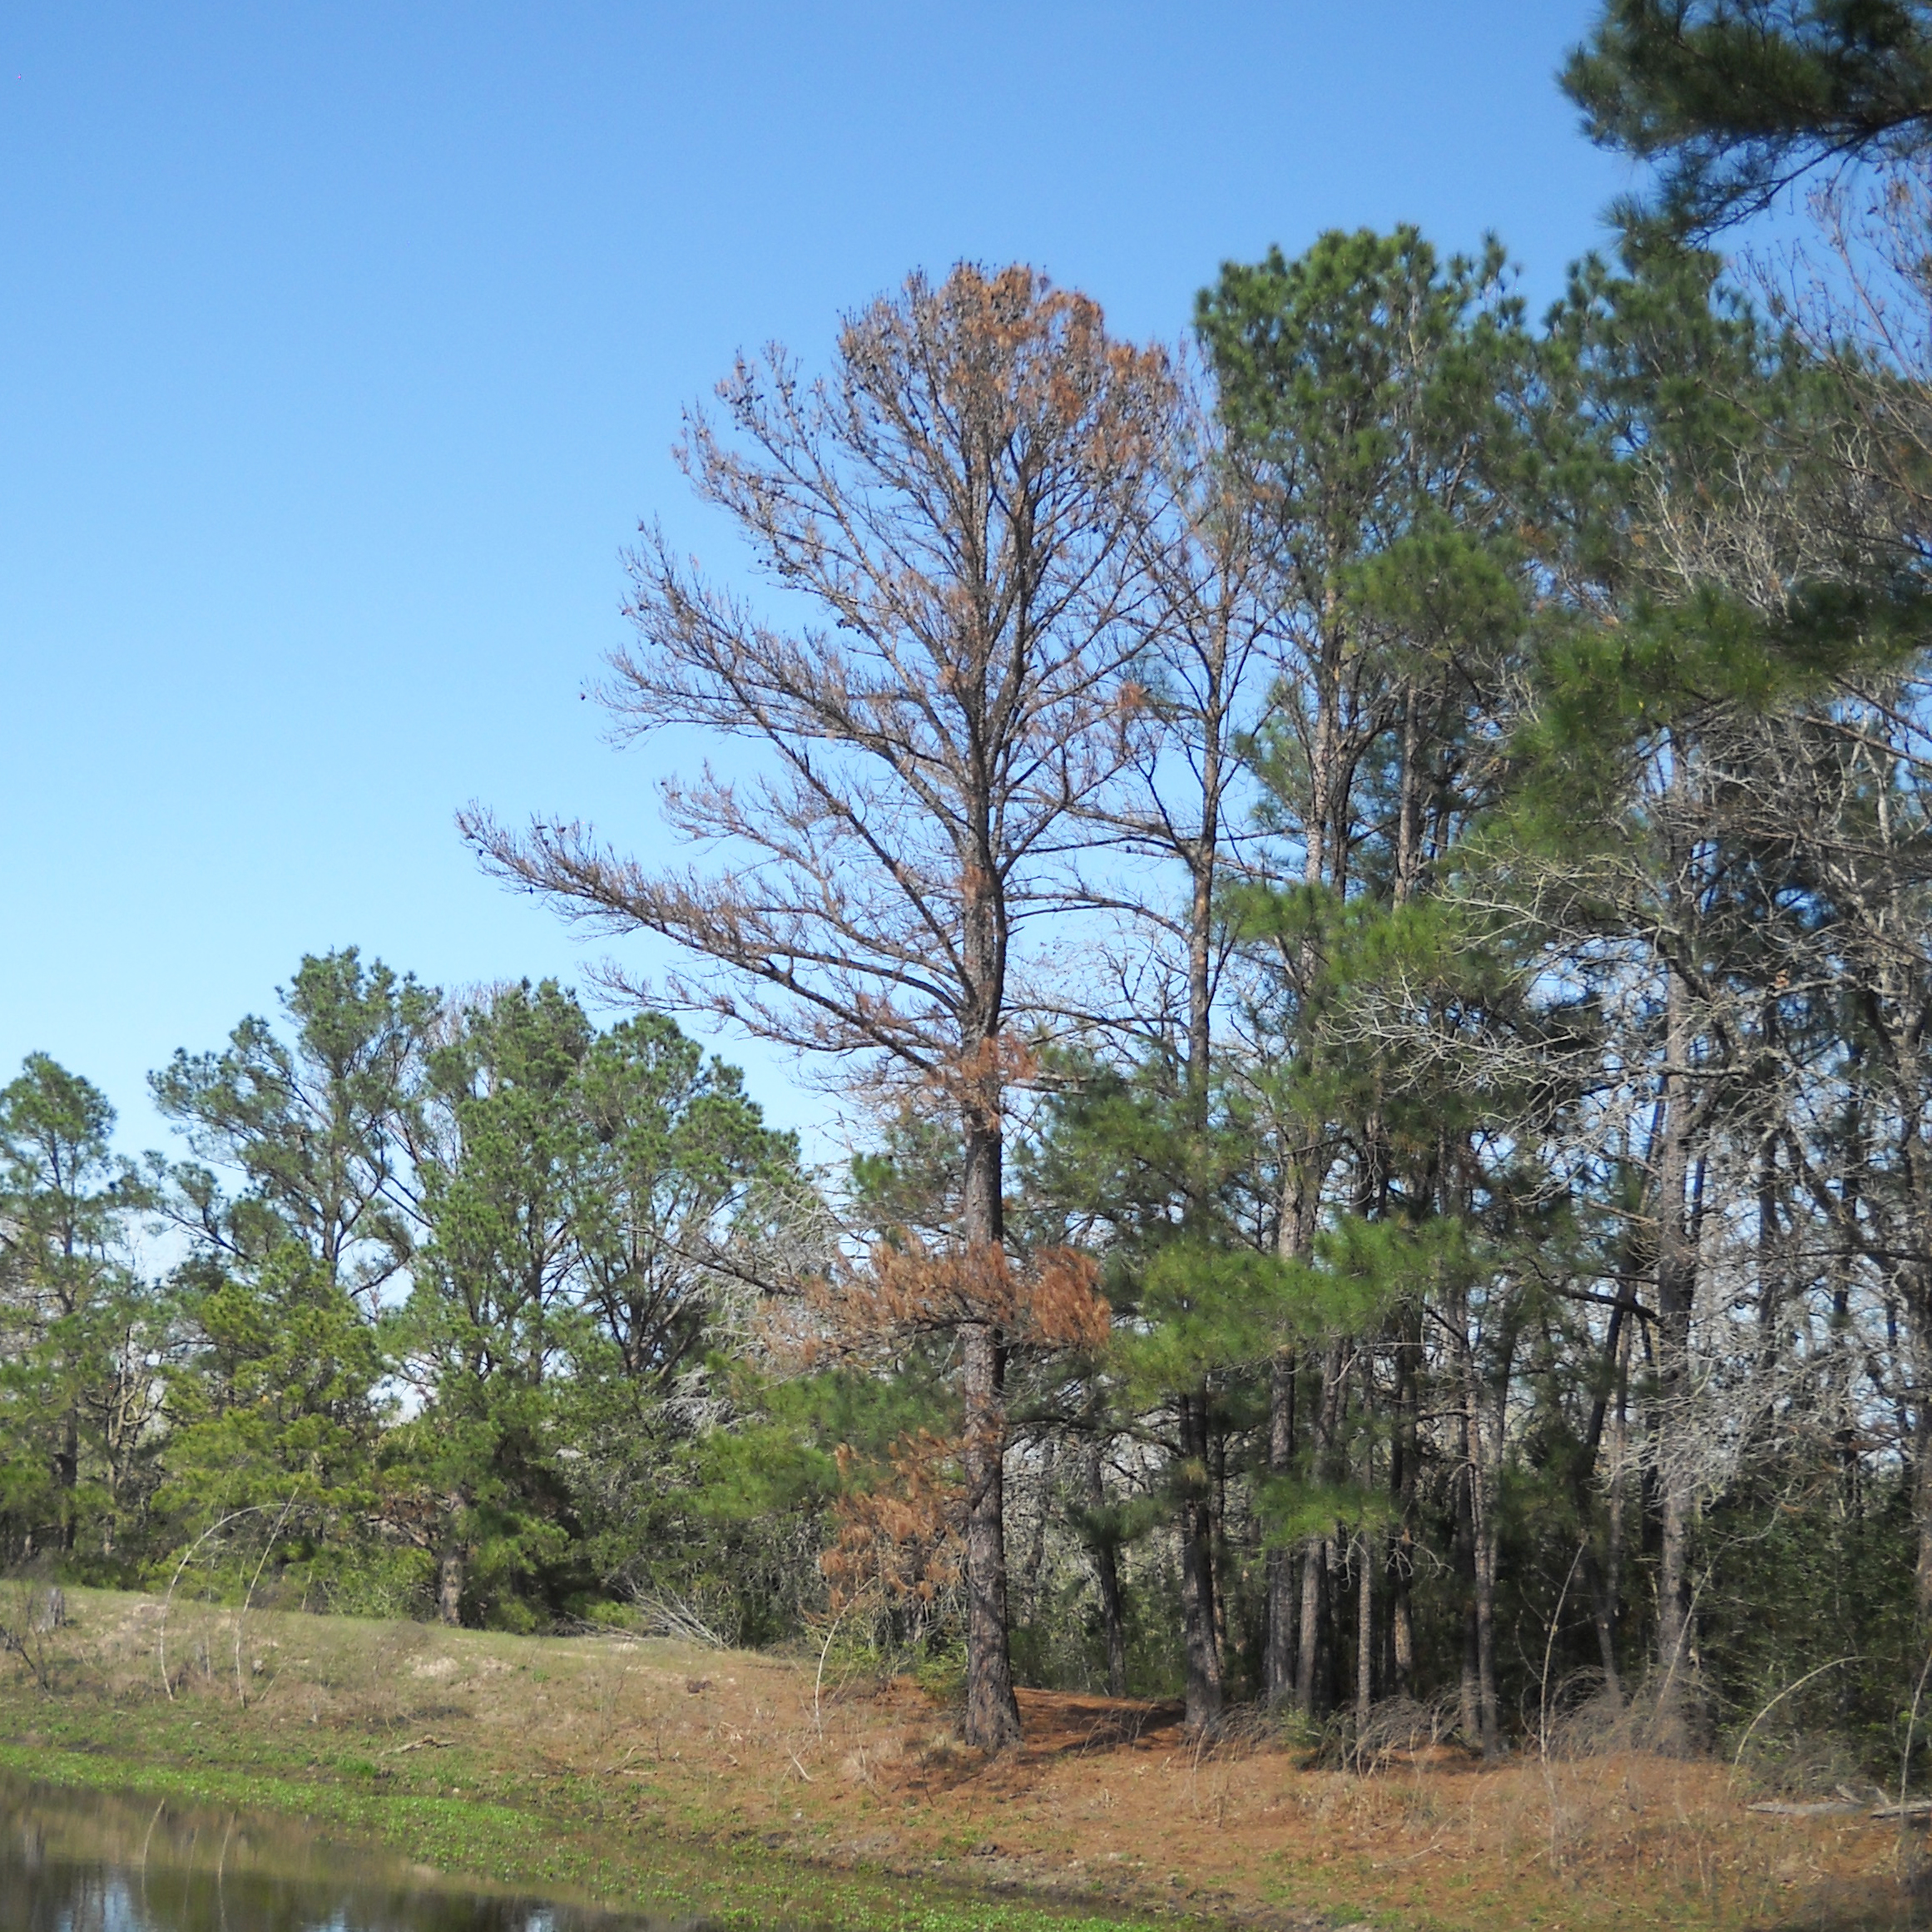 With three consecutive years of severe weather conditions throughout Texas, including extended hard freezes and droughts, East Texas trees have become vulnerable to secondary threats. These threats include cedar bark beetles, Ips engraver beetles, hypoxylon canker and cedar rust fungi.